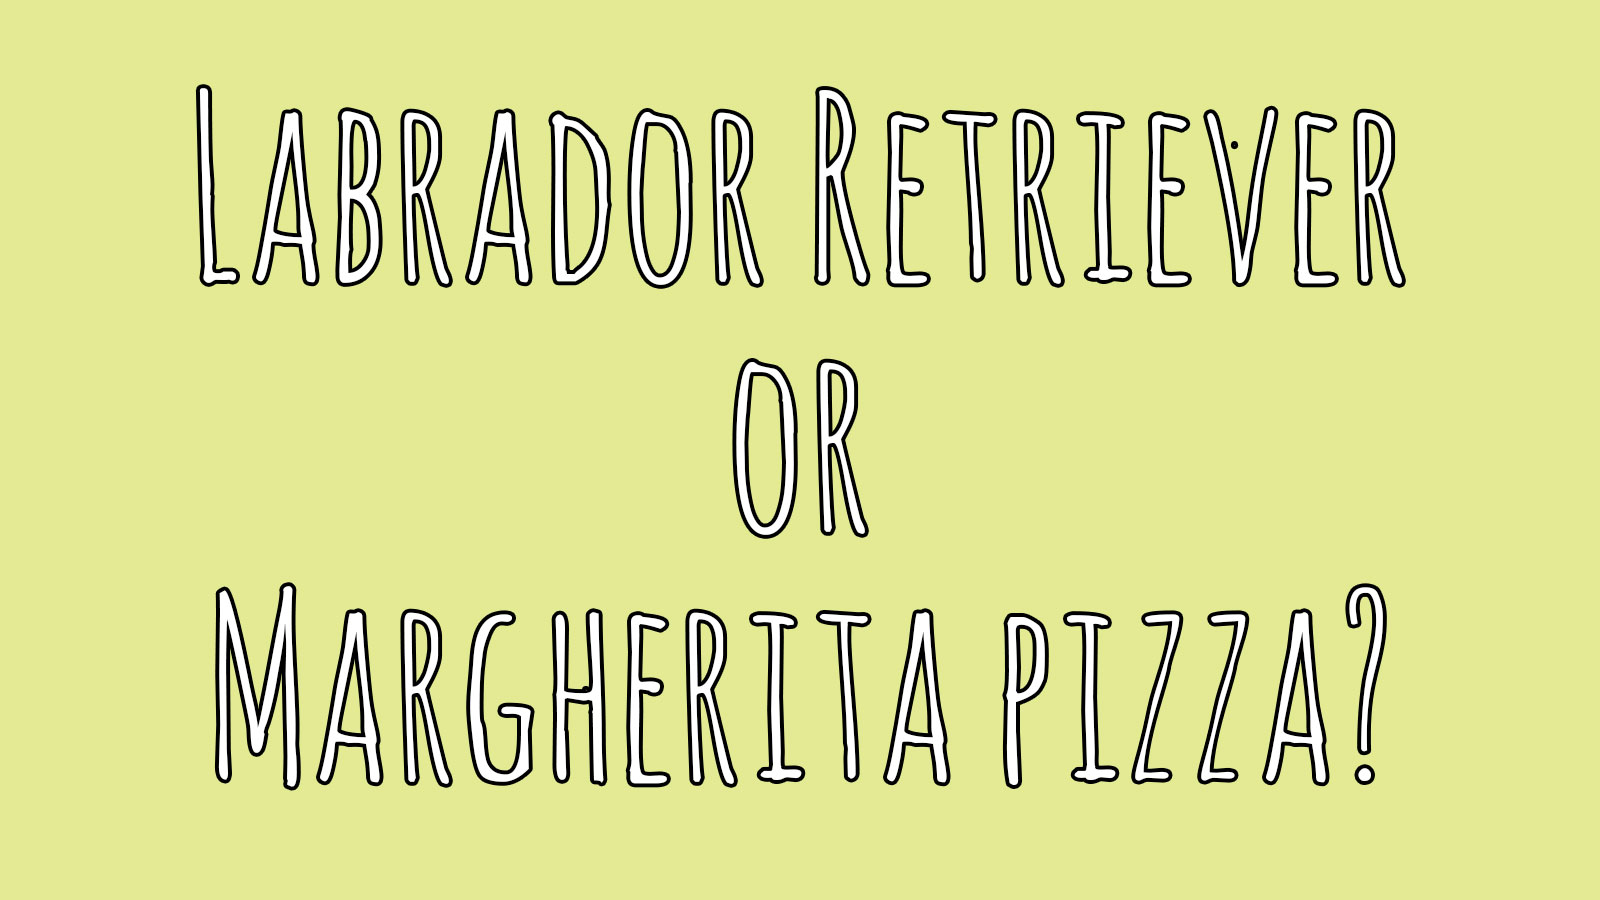 🐶 Choose Between Puppies and Pizza and We’ll Reveal Your Introvert/Extrovert Percentage 🍕 912